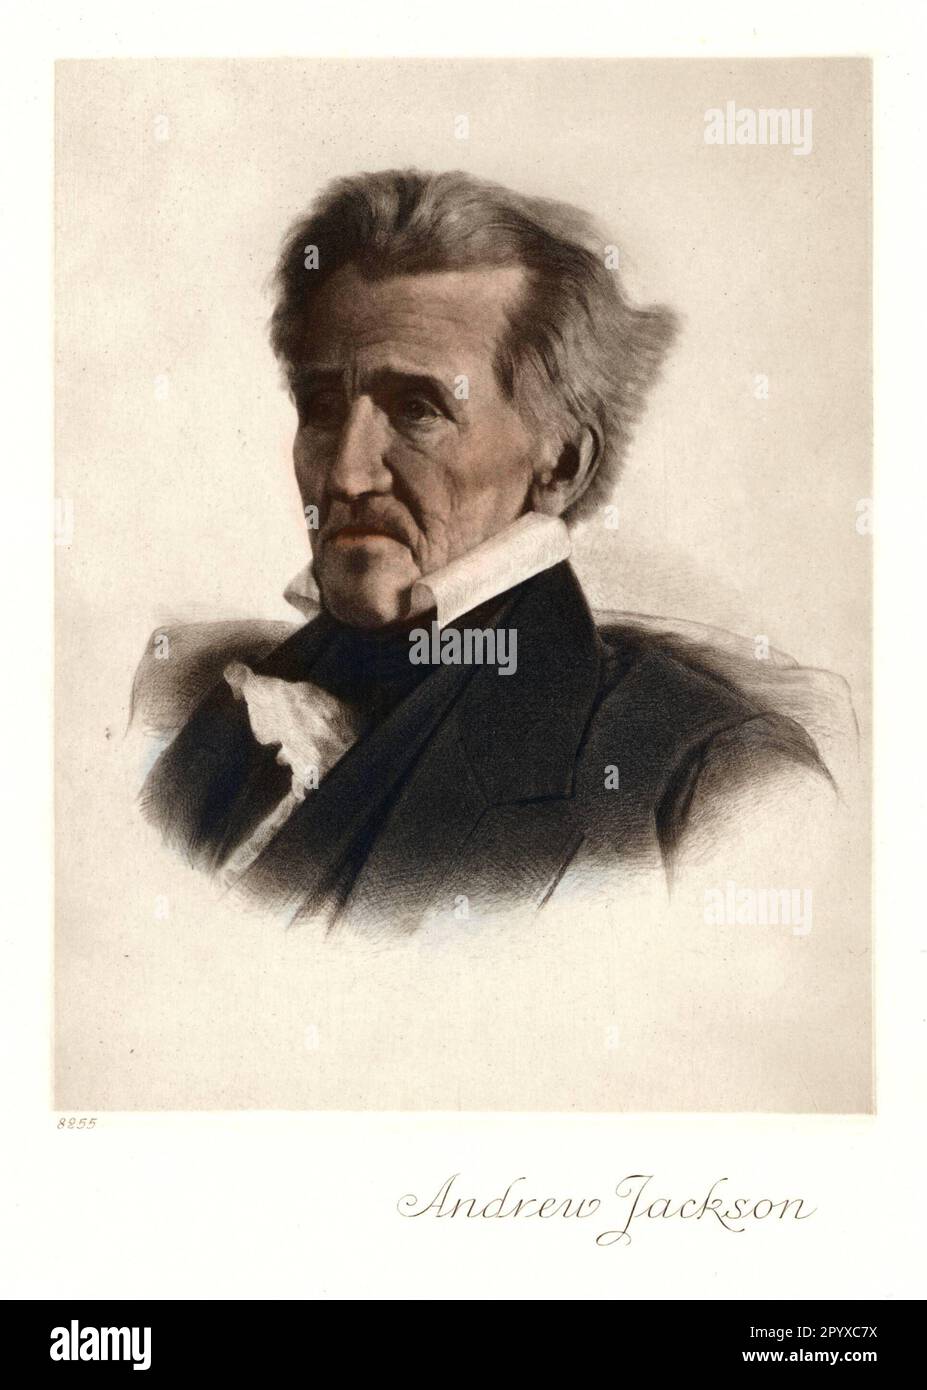 Andrew Jackson (1767-1845), 7th President of the USA (1829-1837). Painting. Photo: Heliogravure, Corpus Imaginum, Hanfstaengl Collection. [automated translation] Stock Photo